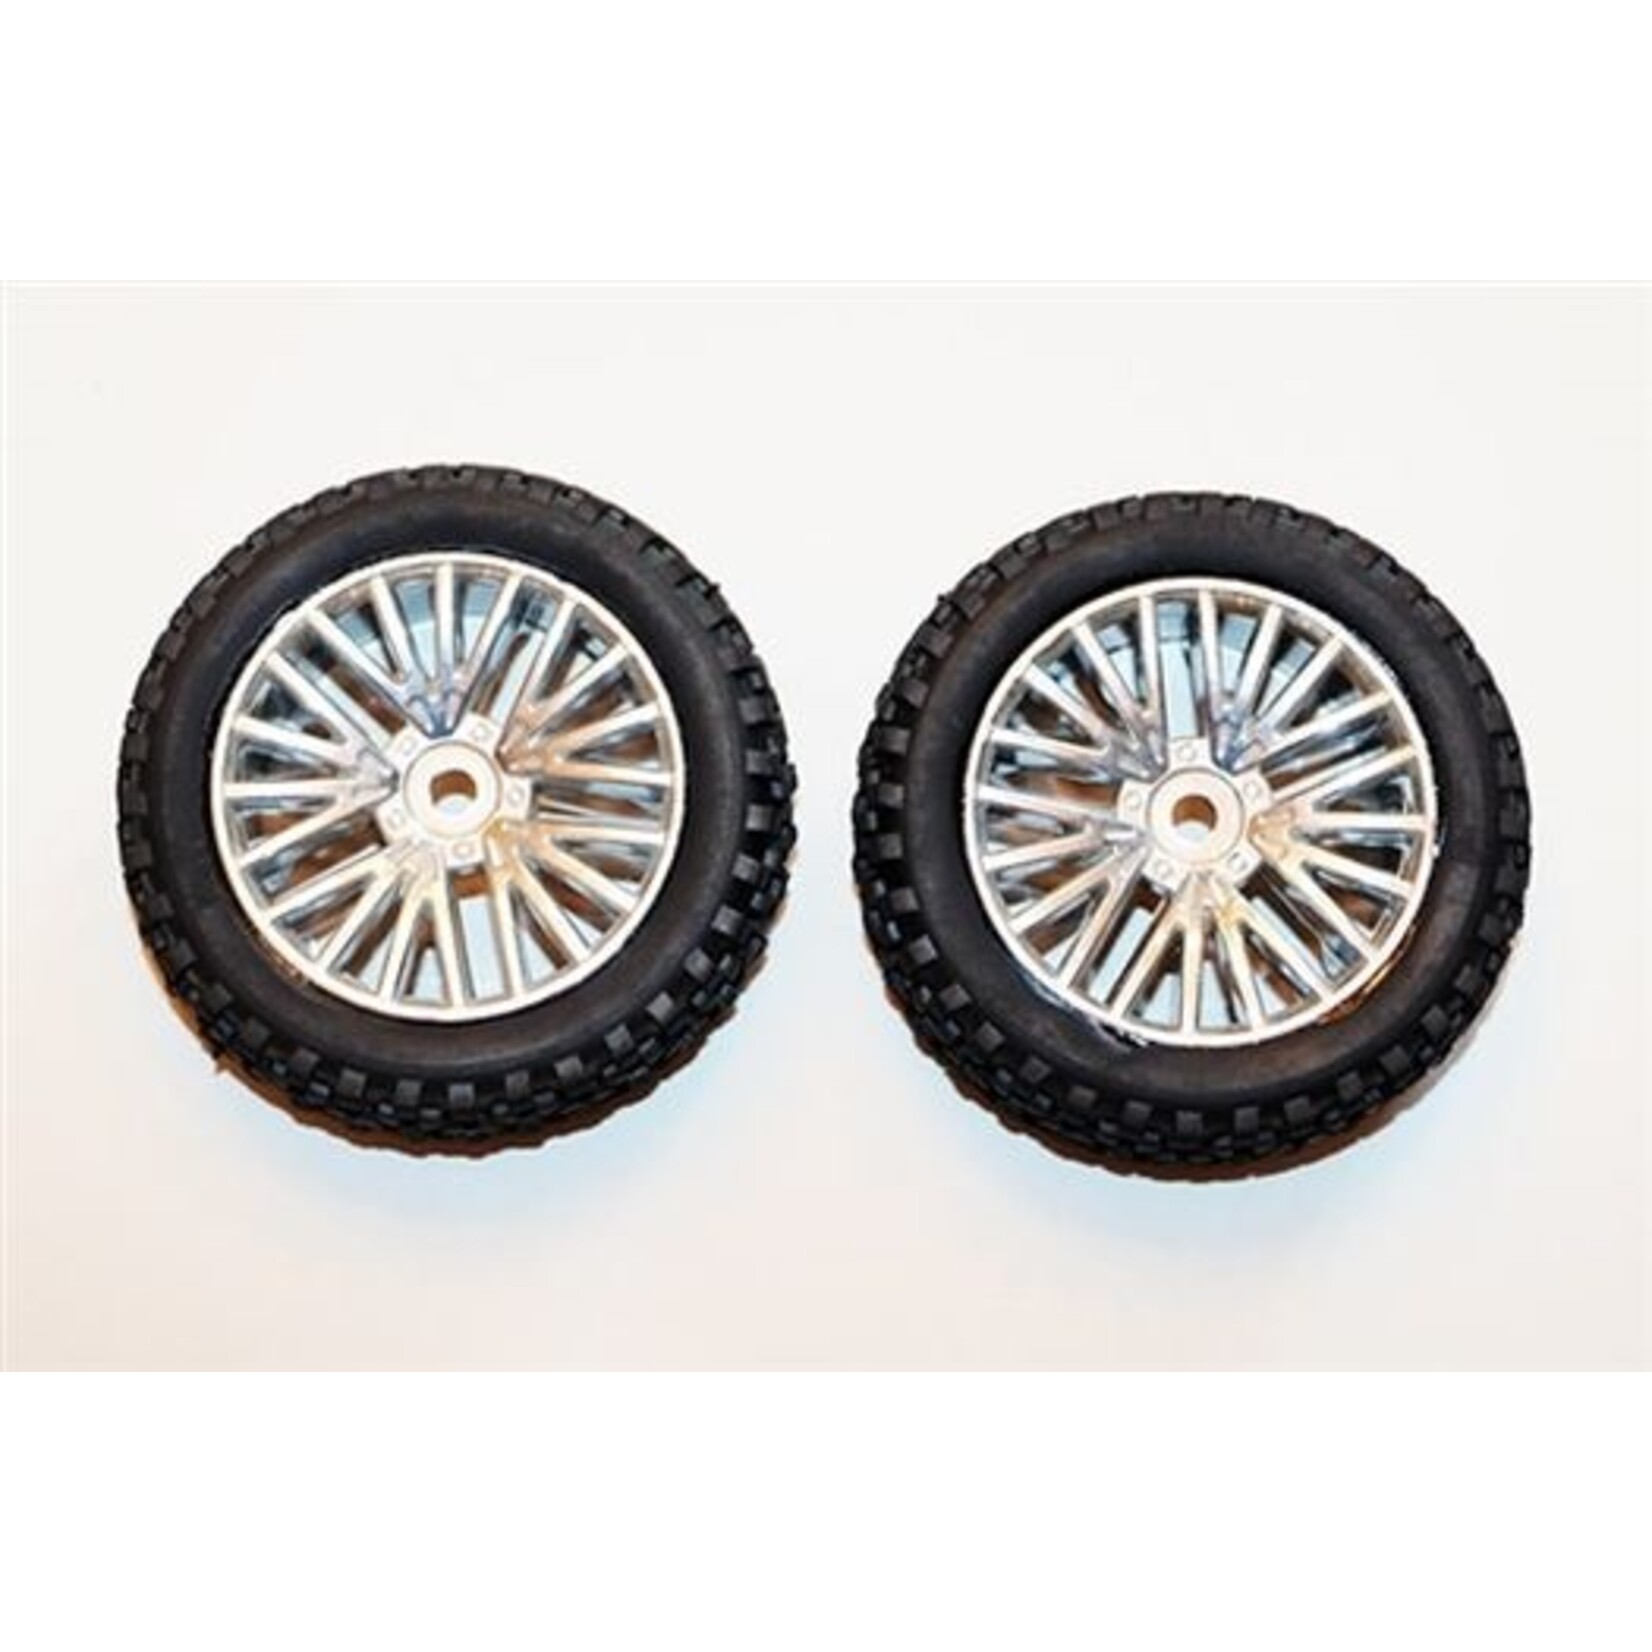 DHK Hobby Tires , Front - Mounted on Chrome Wheels (2pcs) - Wolf 2